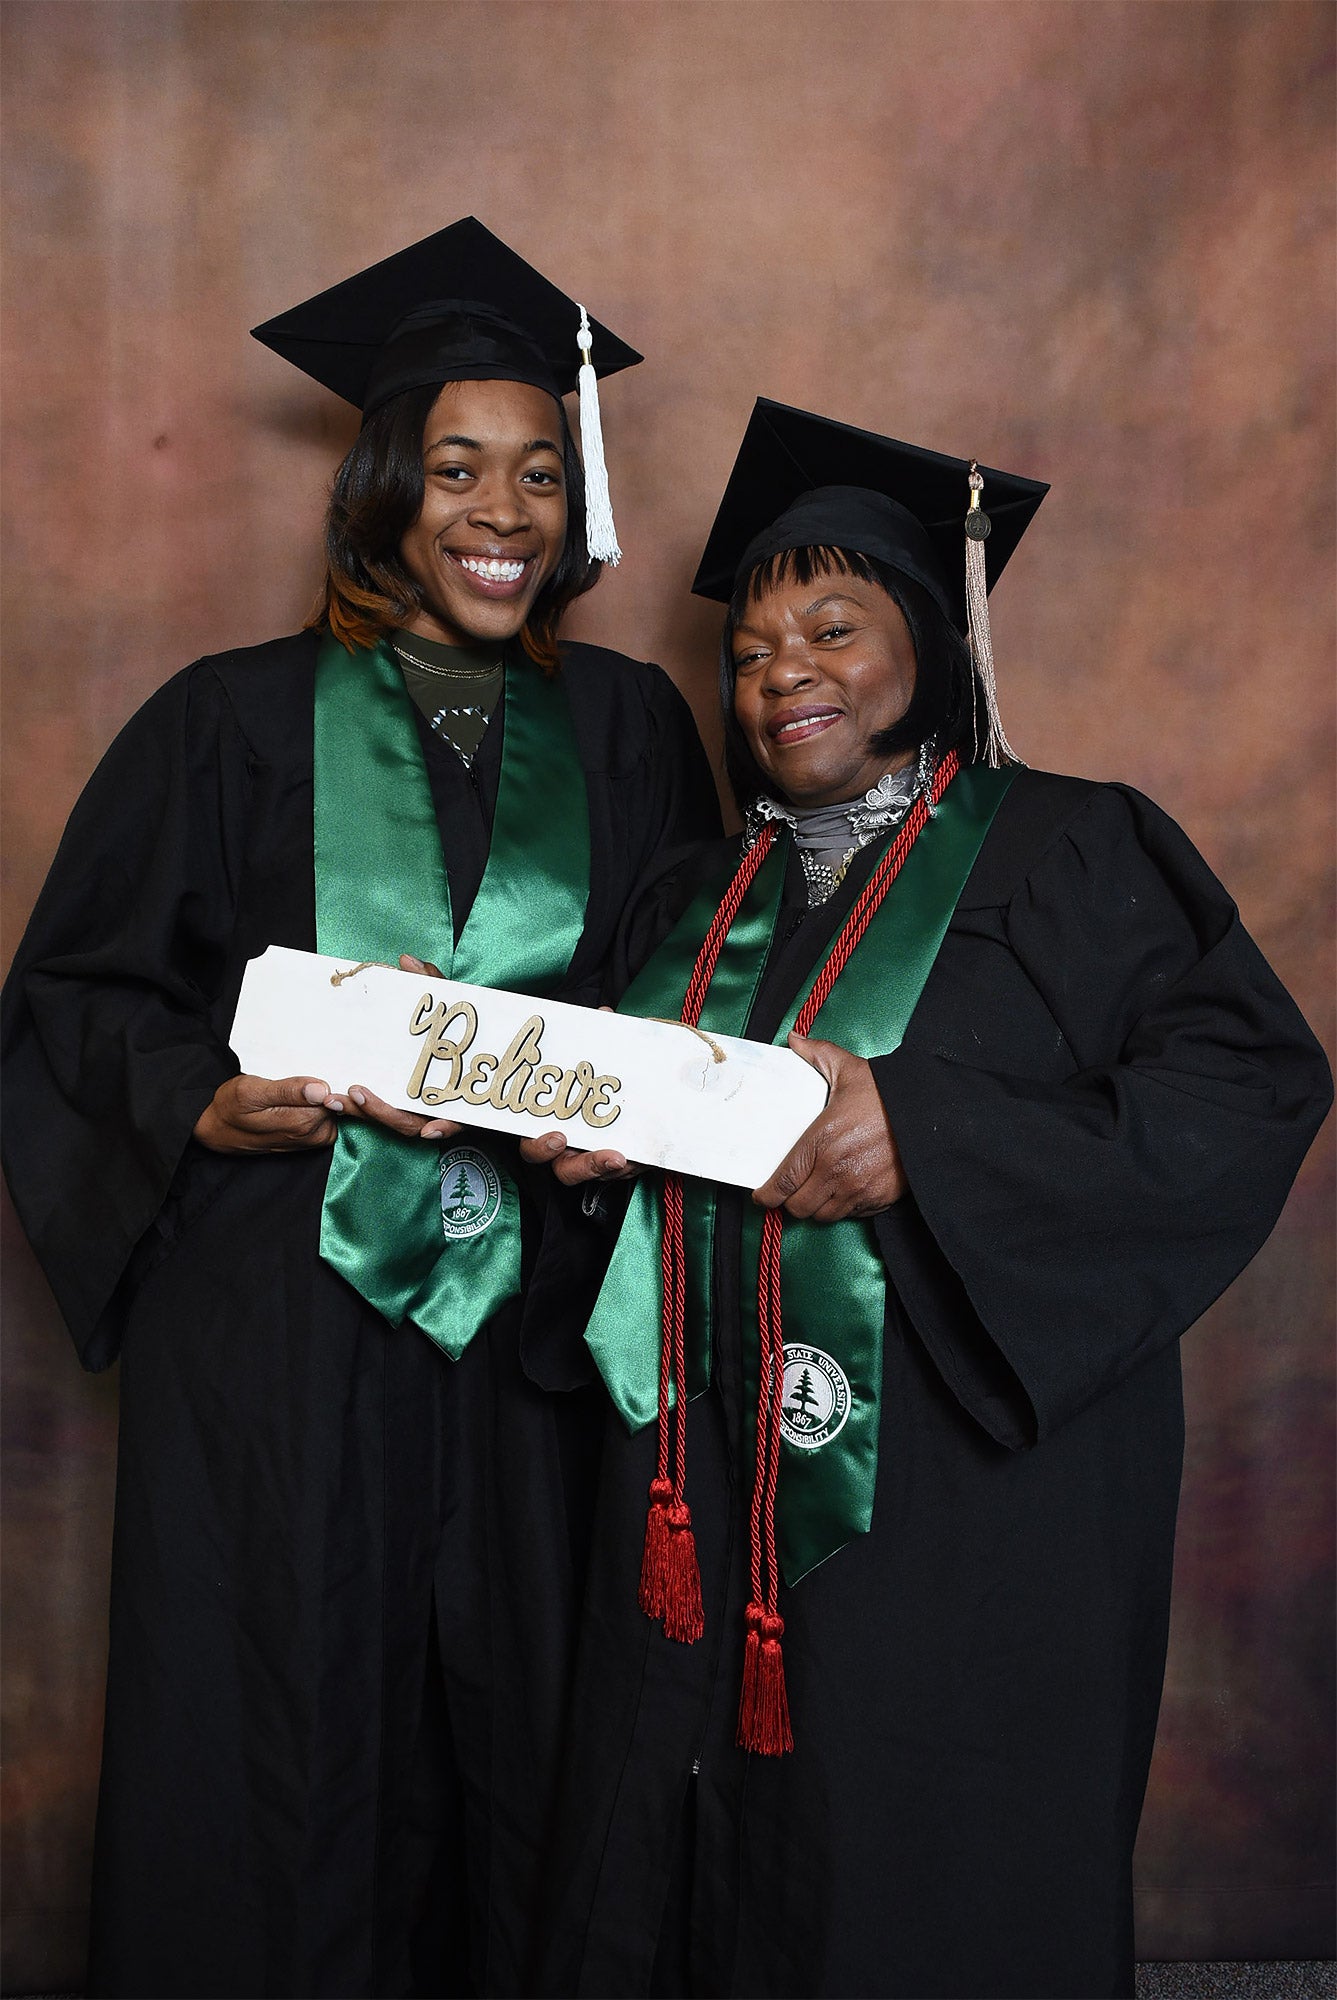 Granddaughter Graduates College Alongside Grandmother Who Raised Her: 'It Meant The World To Me'
